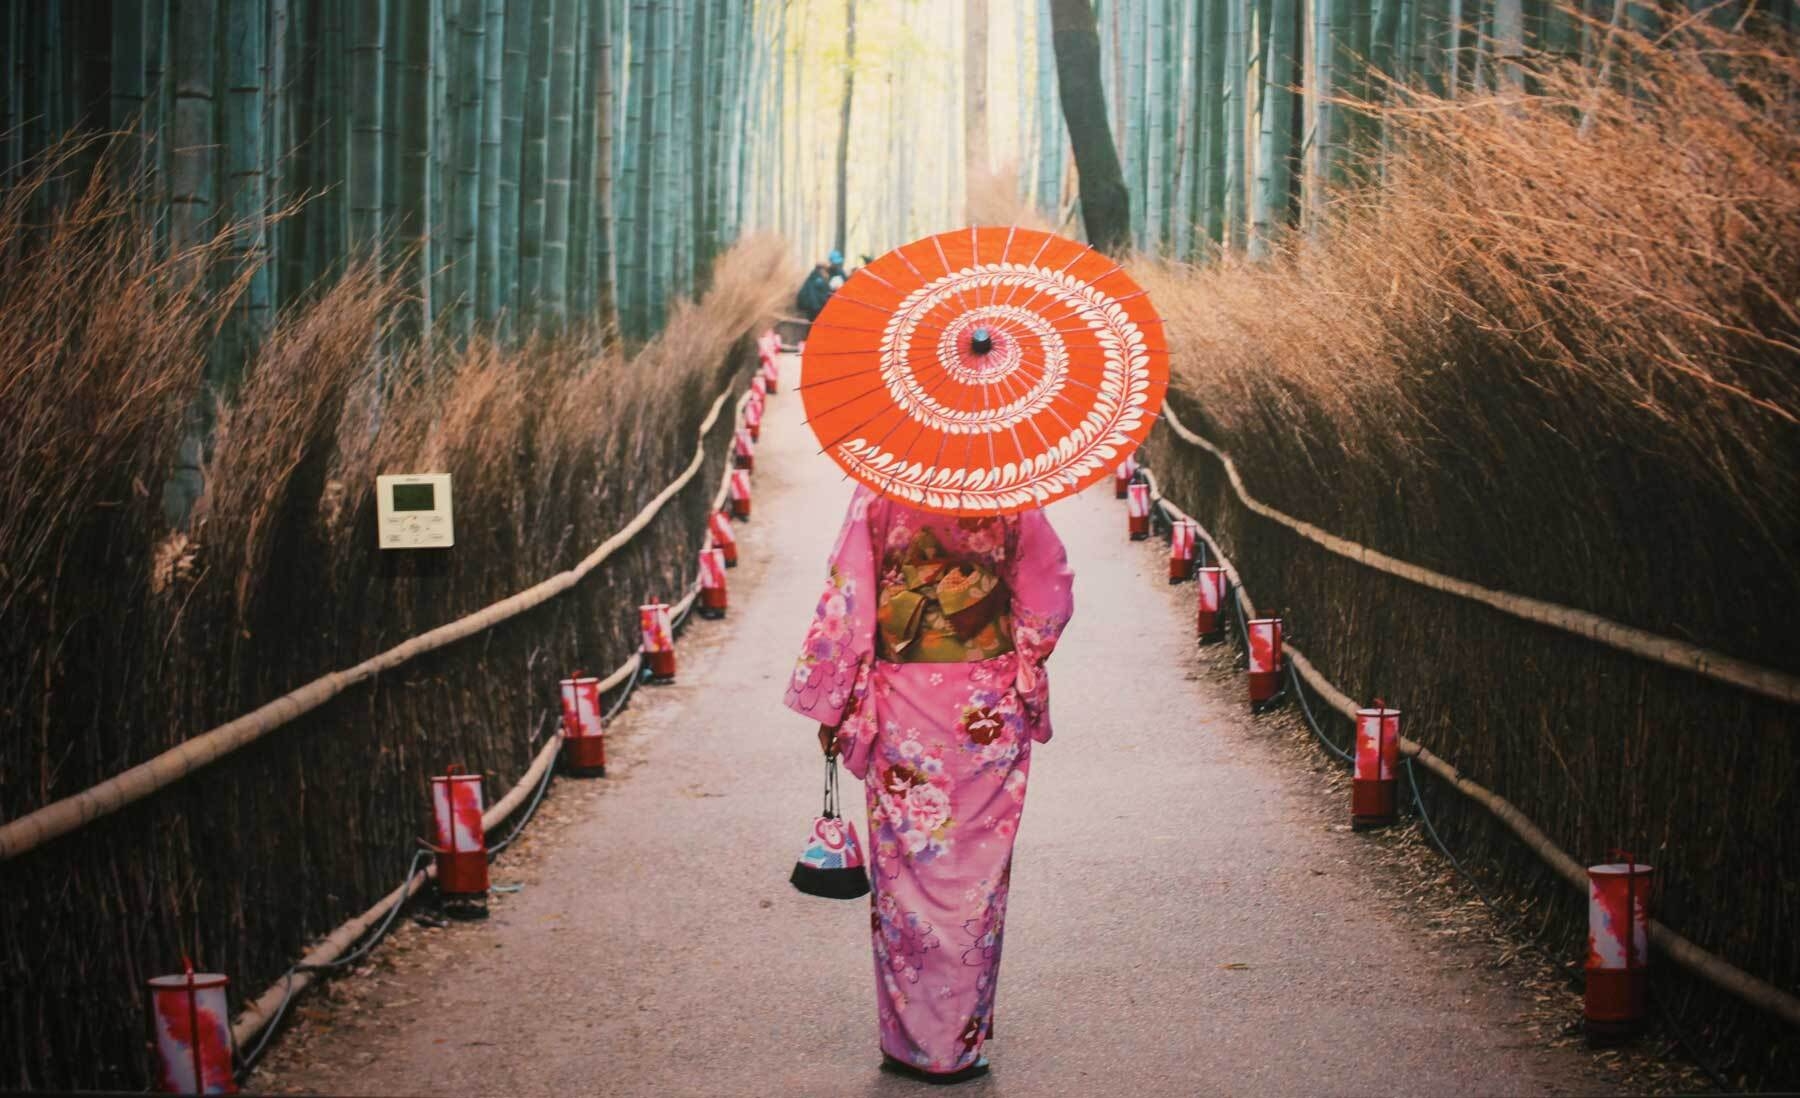 An image of a mural on the wall that features a woman in a traditional kimono walking with an umbrella trailing behind her.